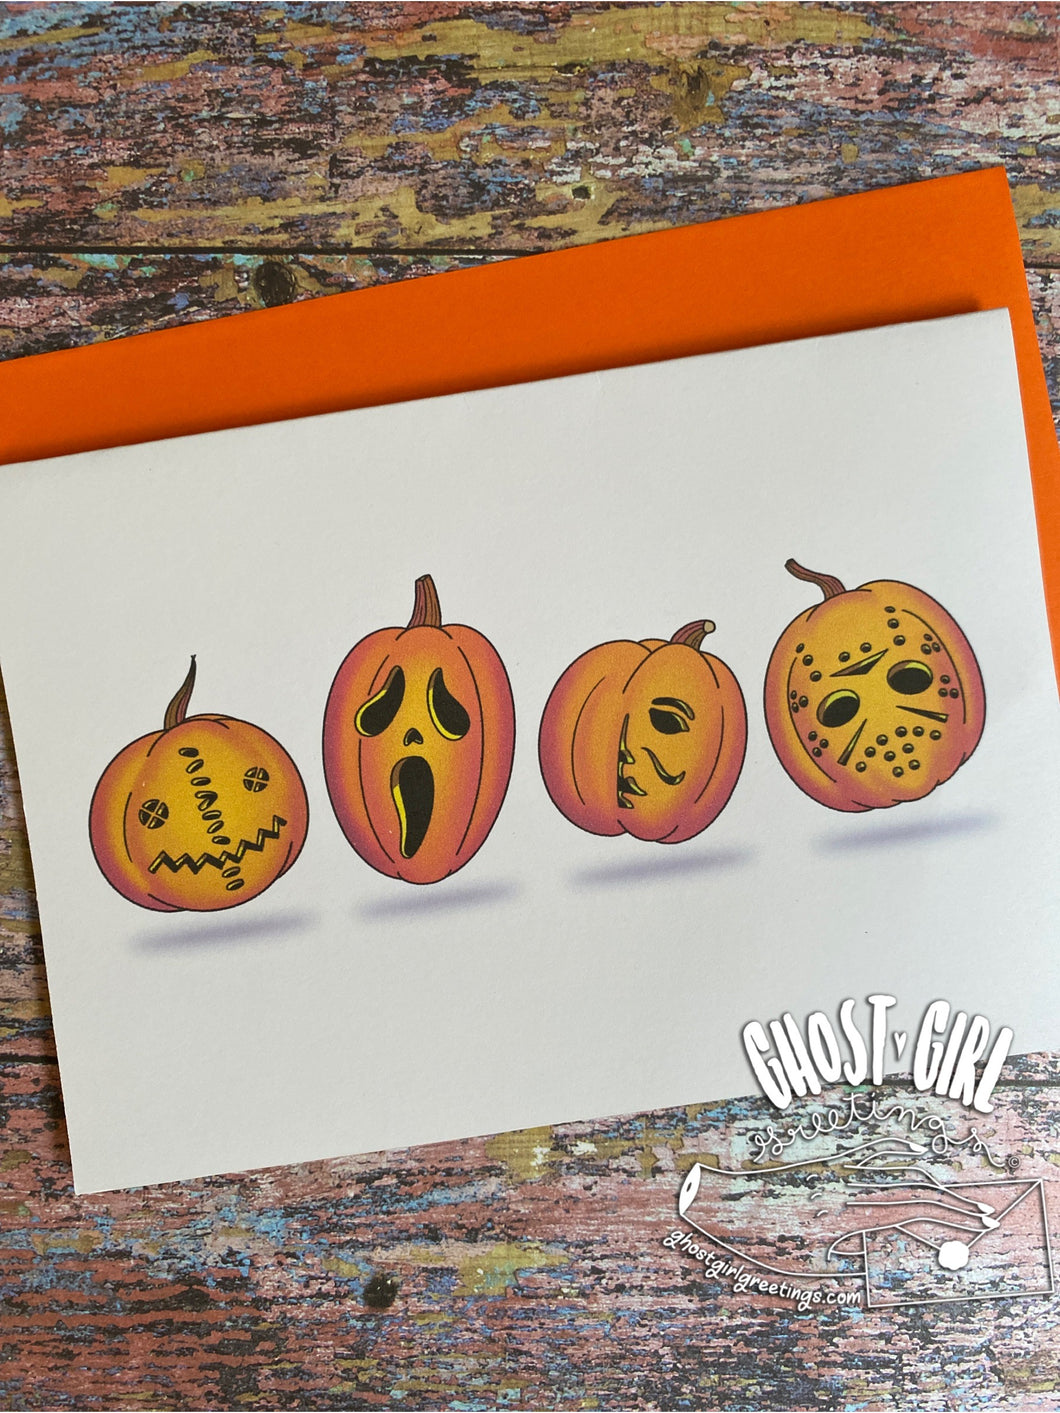 Any occasion card: Squad Gourds